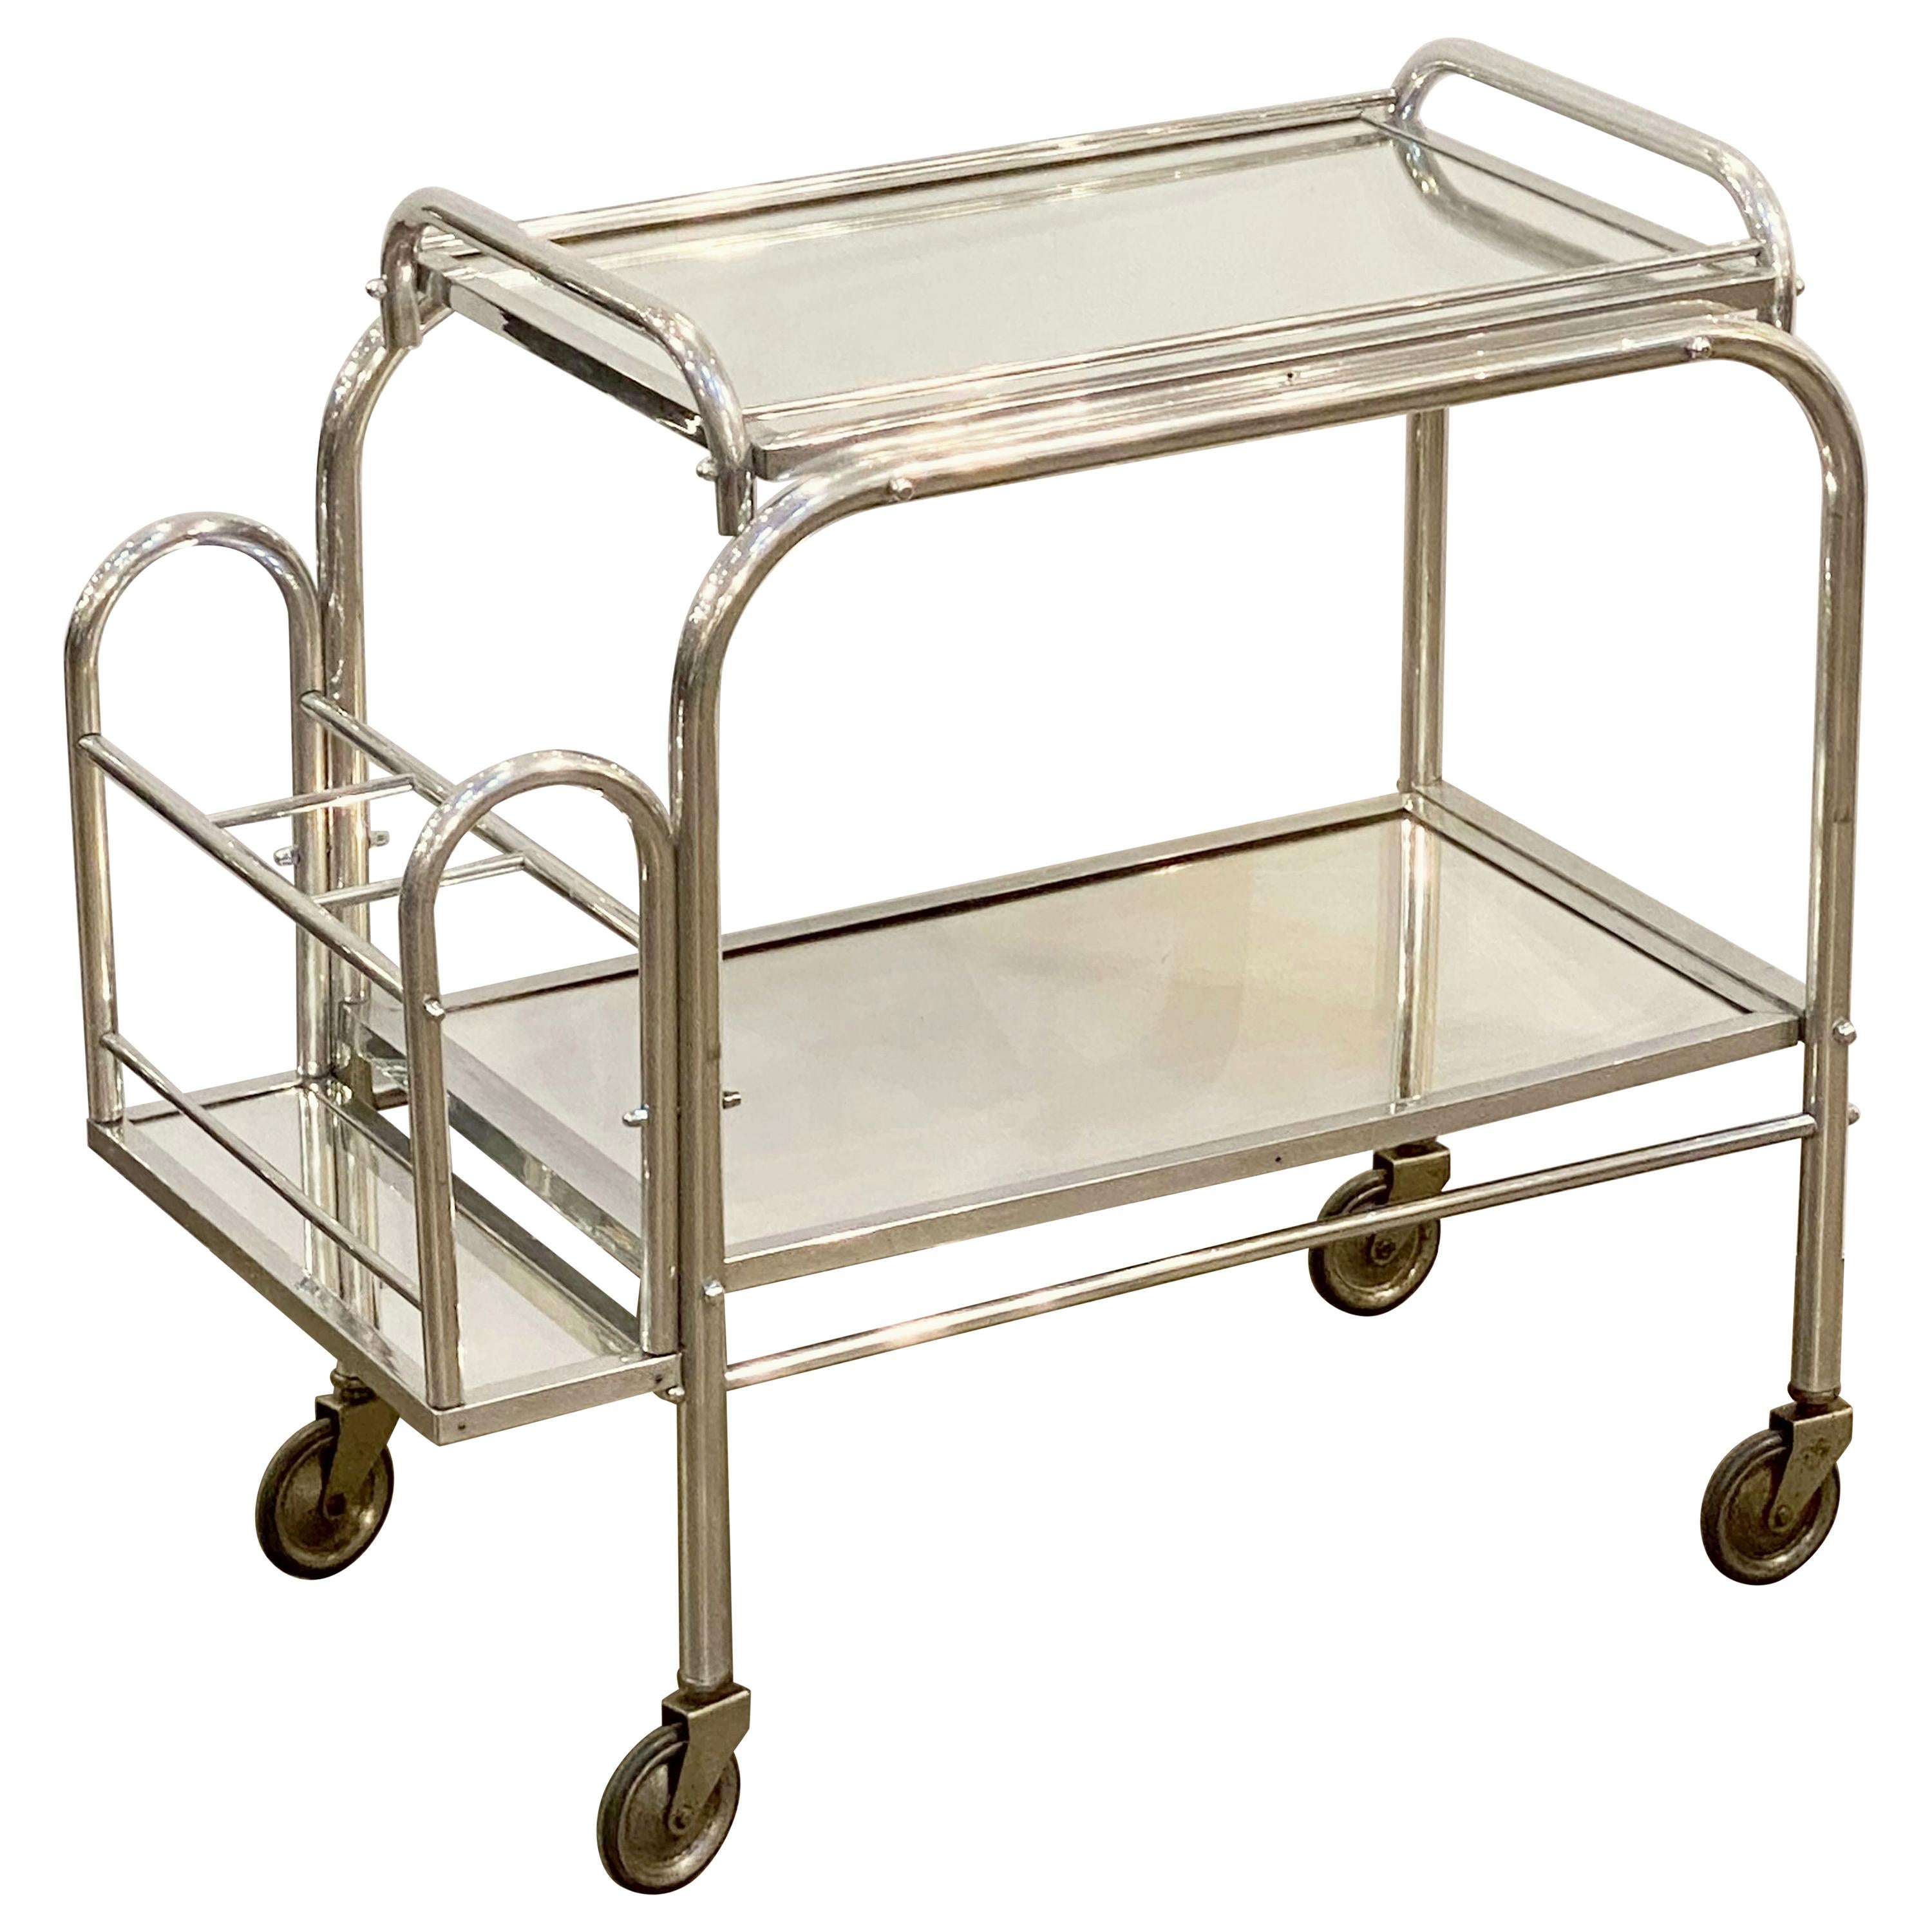 English Art Deco Rolling Drinks Cart of Brushed Aluminum and Glass